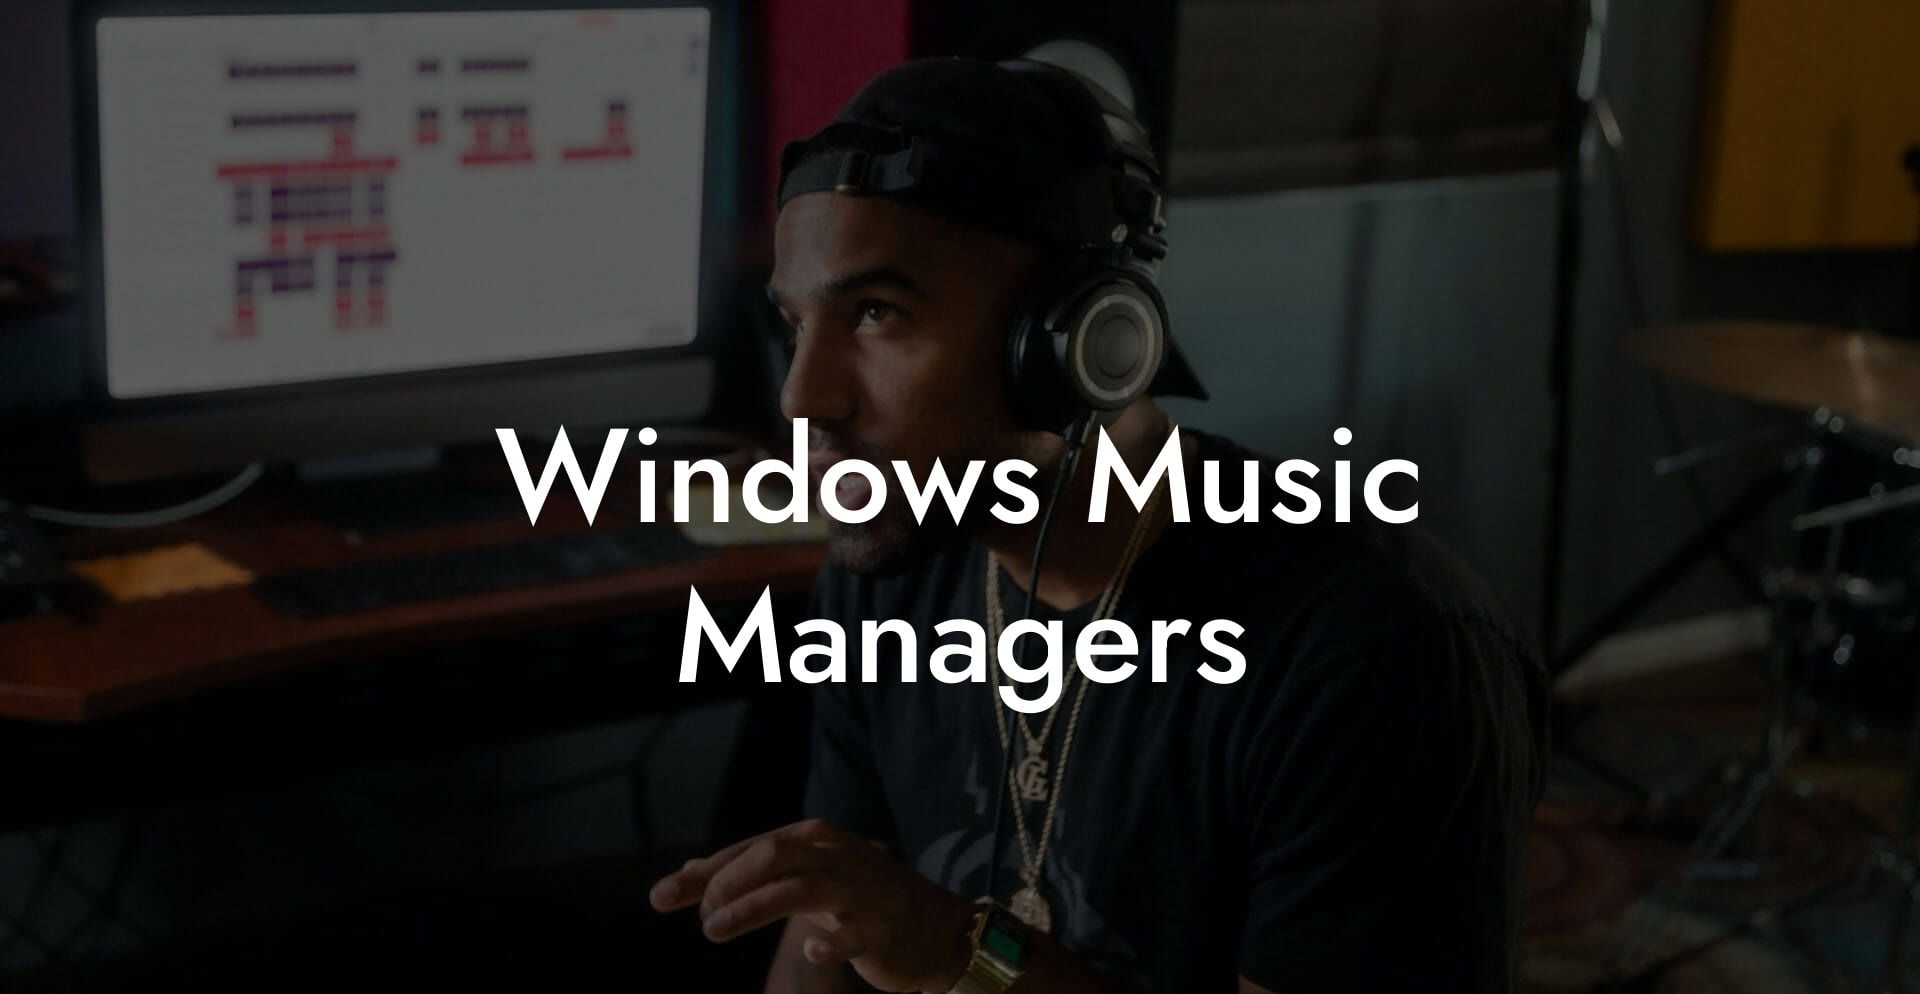 Windows Music Managers